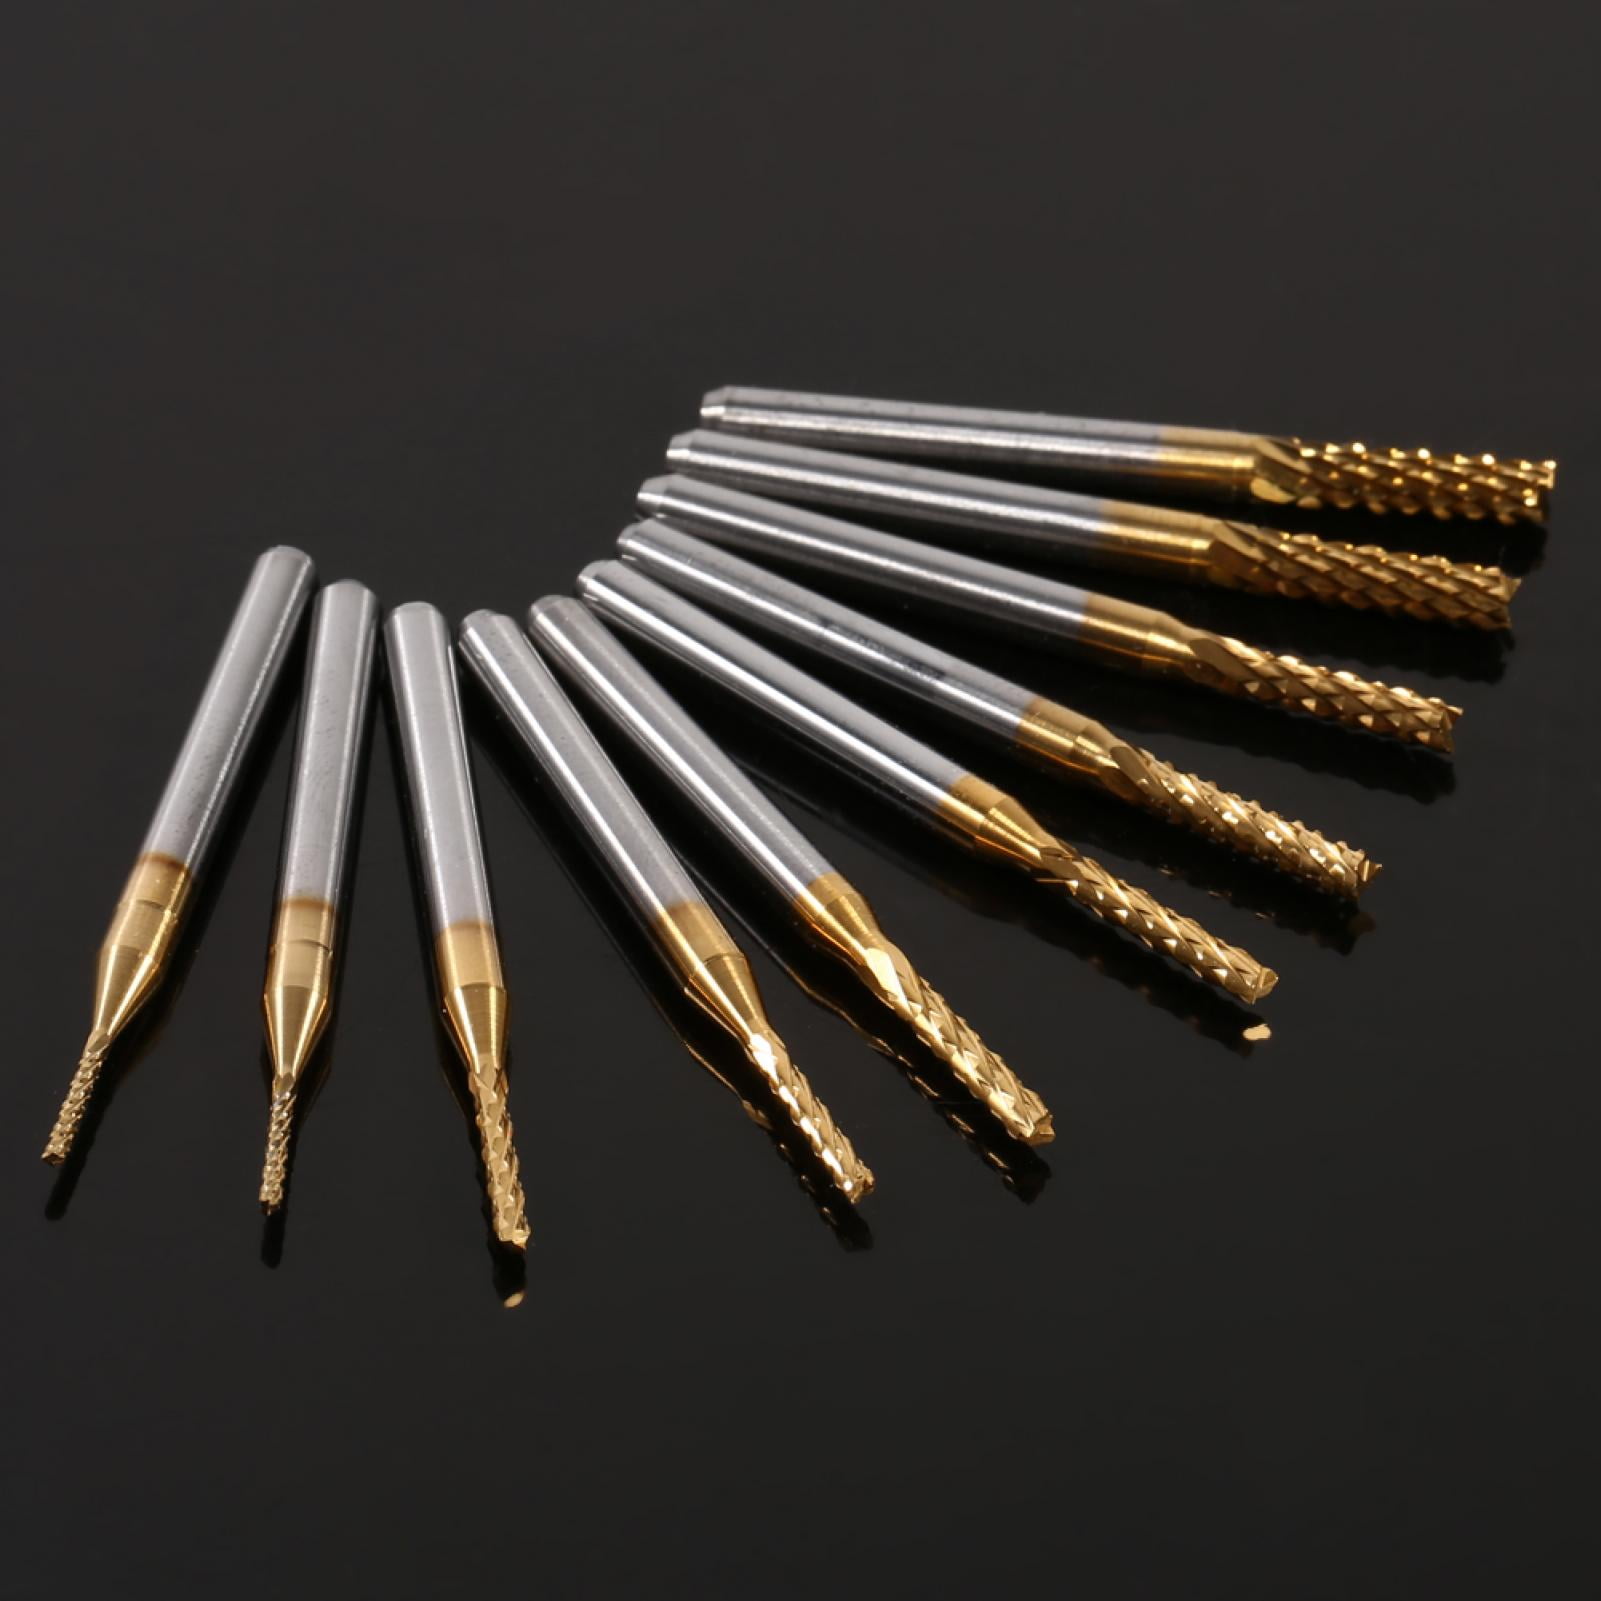 10pcs Coated End Mill Cemented Carbide CNC Milling Cutters Tools Set 